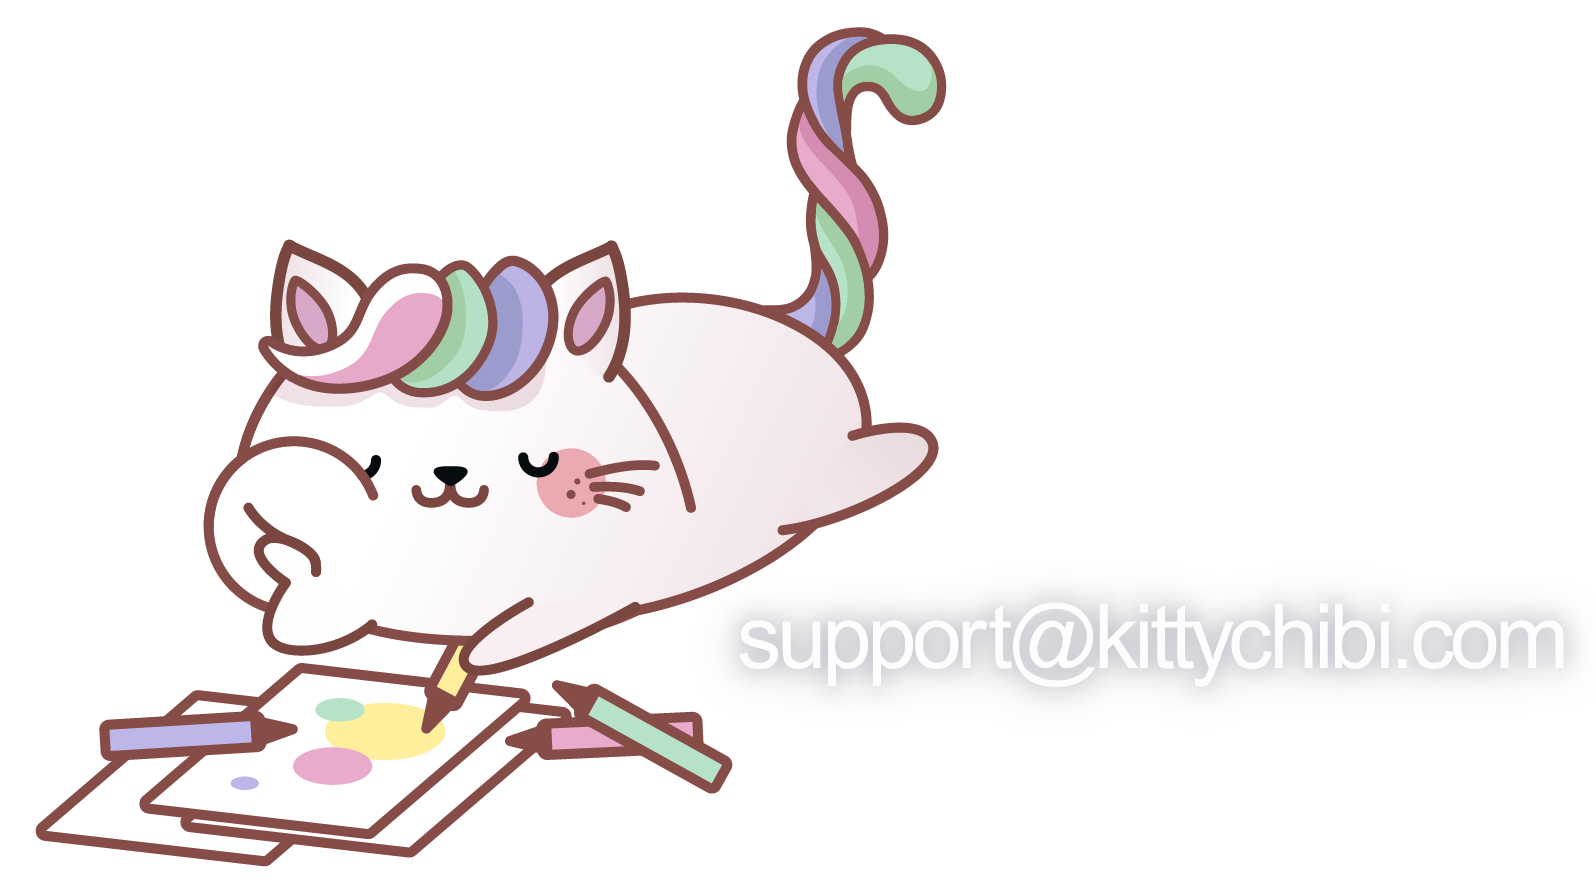 Send a message to Kittychibi Support